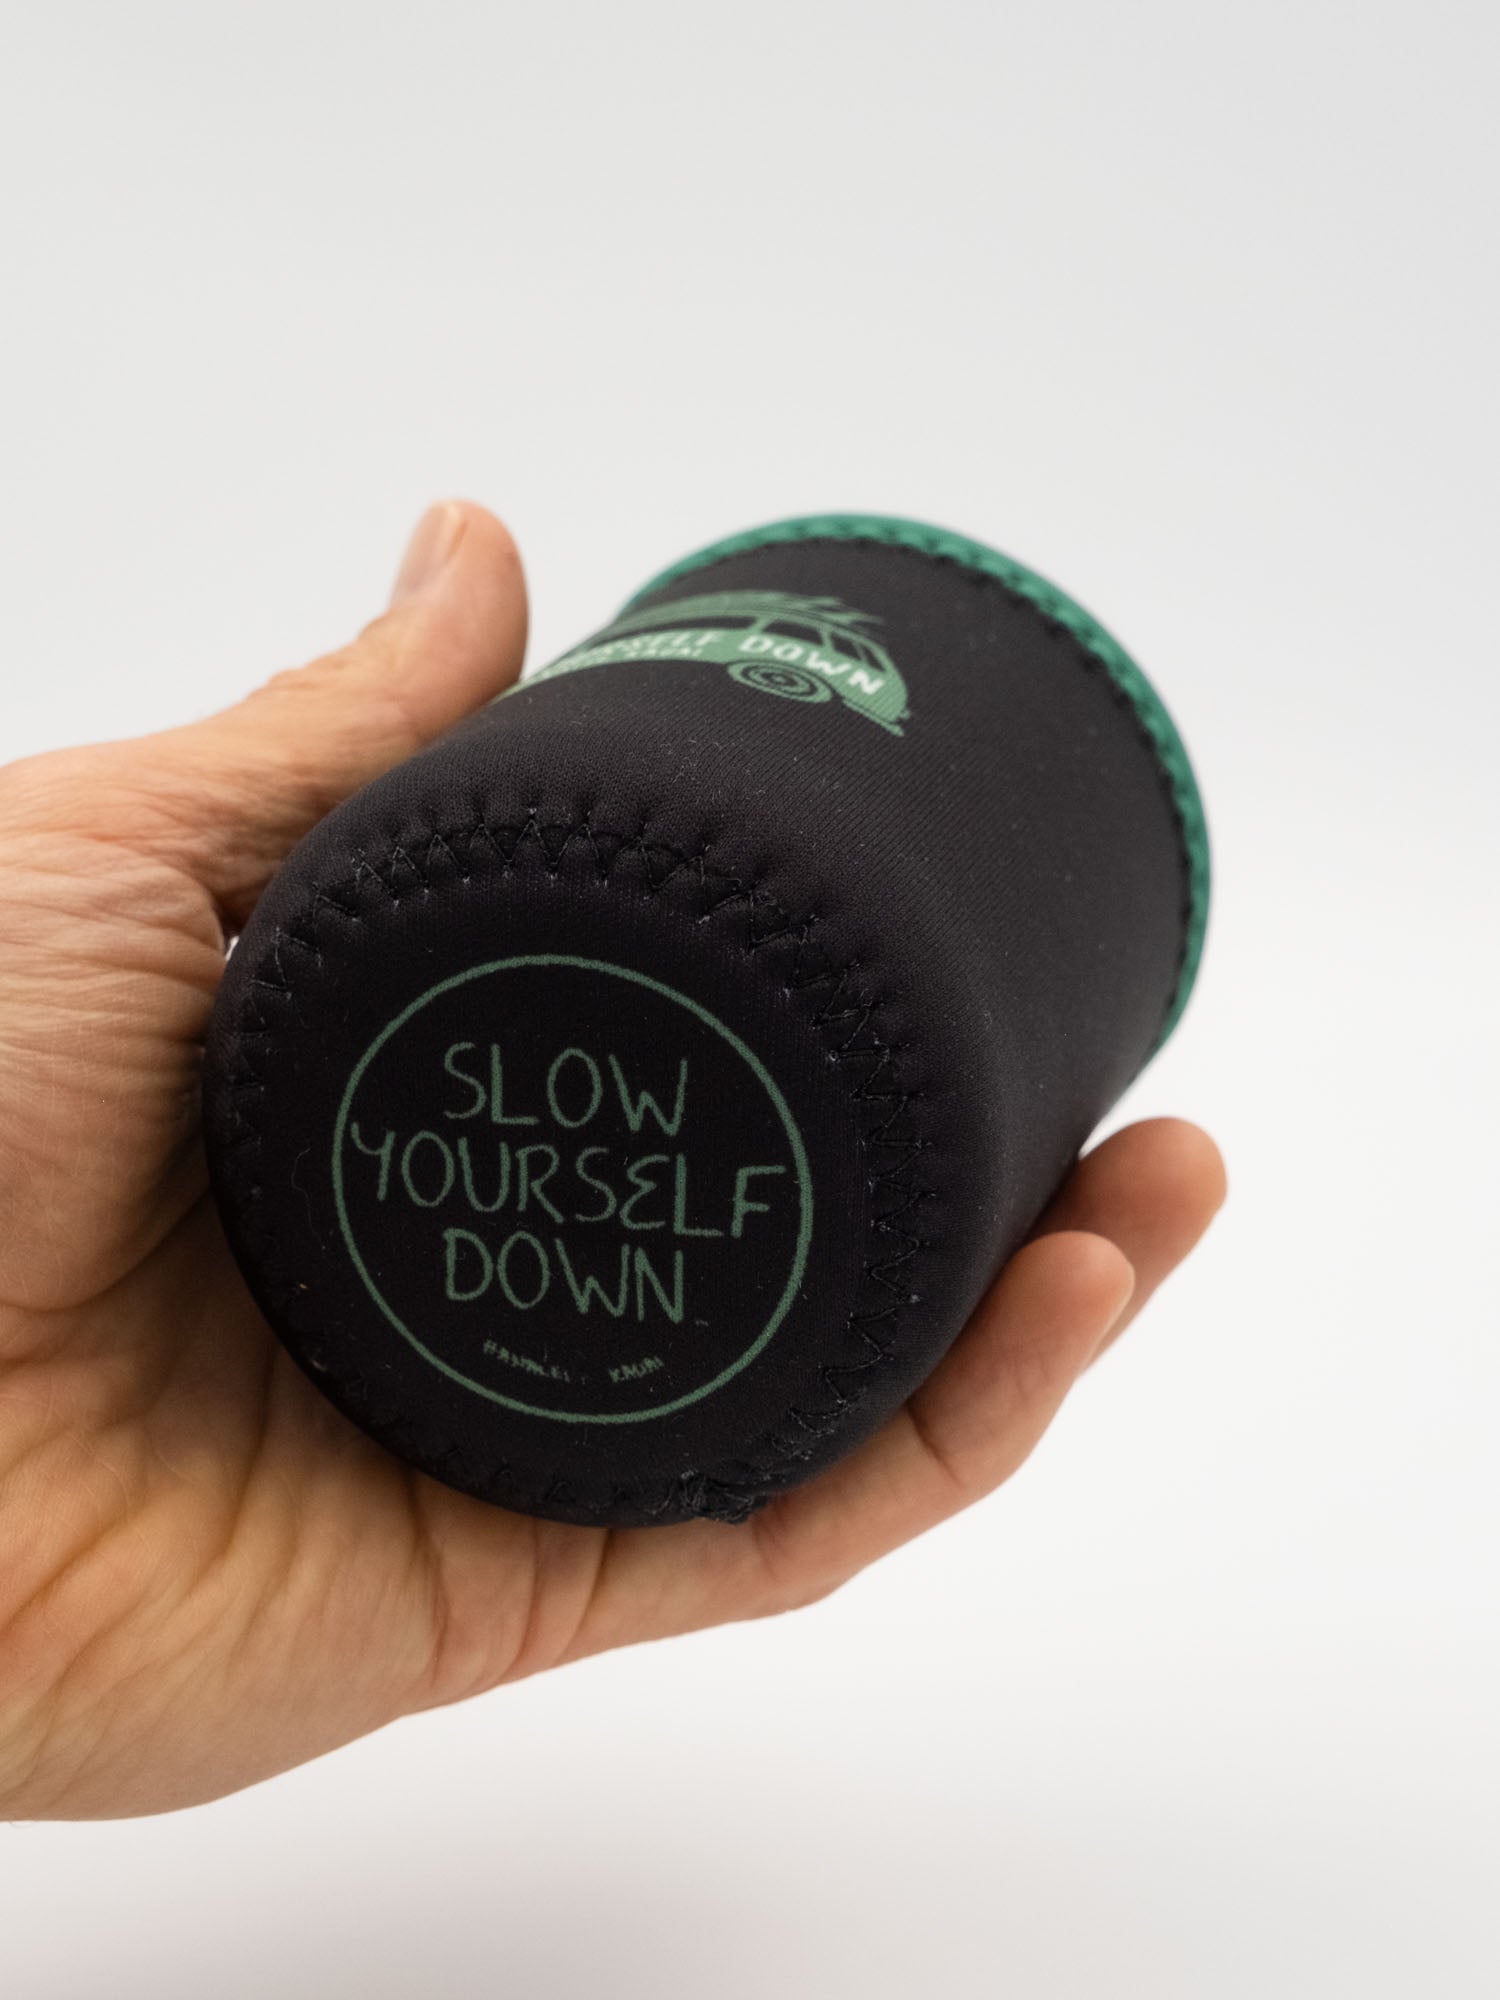 Van Life Coozie Coozie - Slow Yourself Down